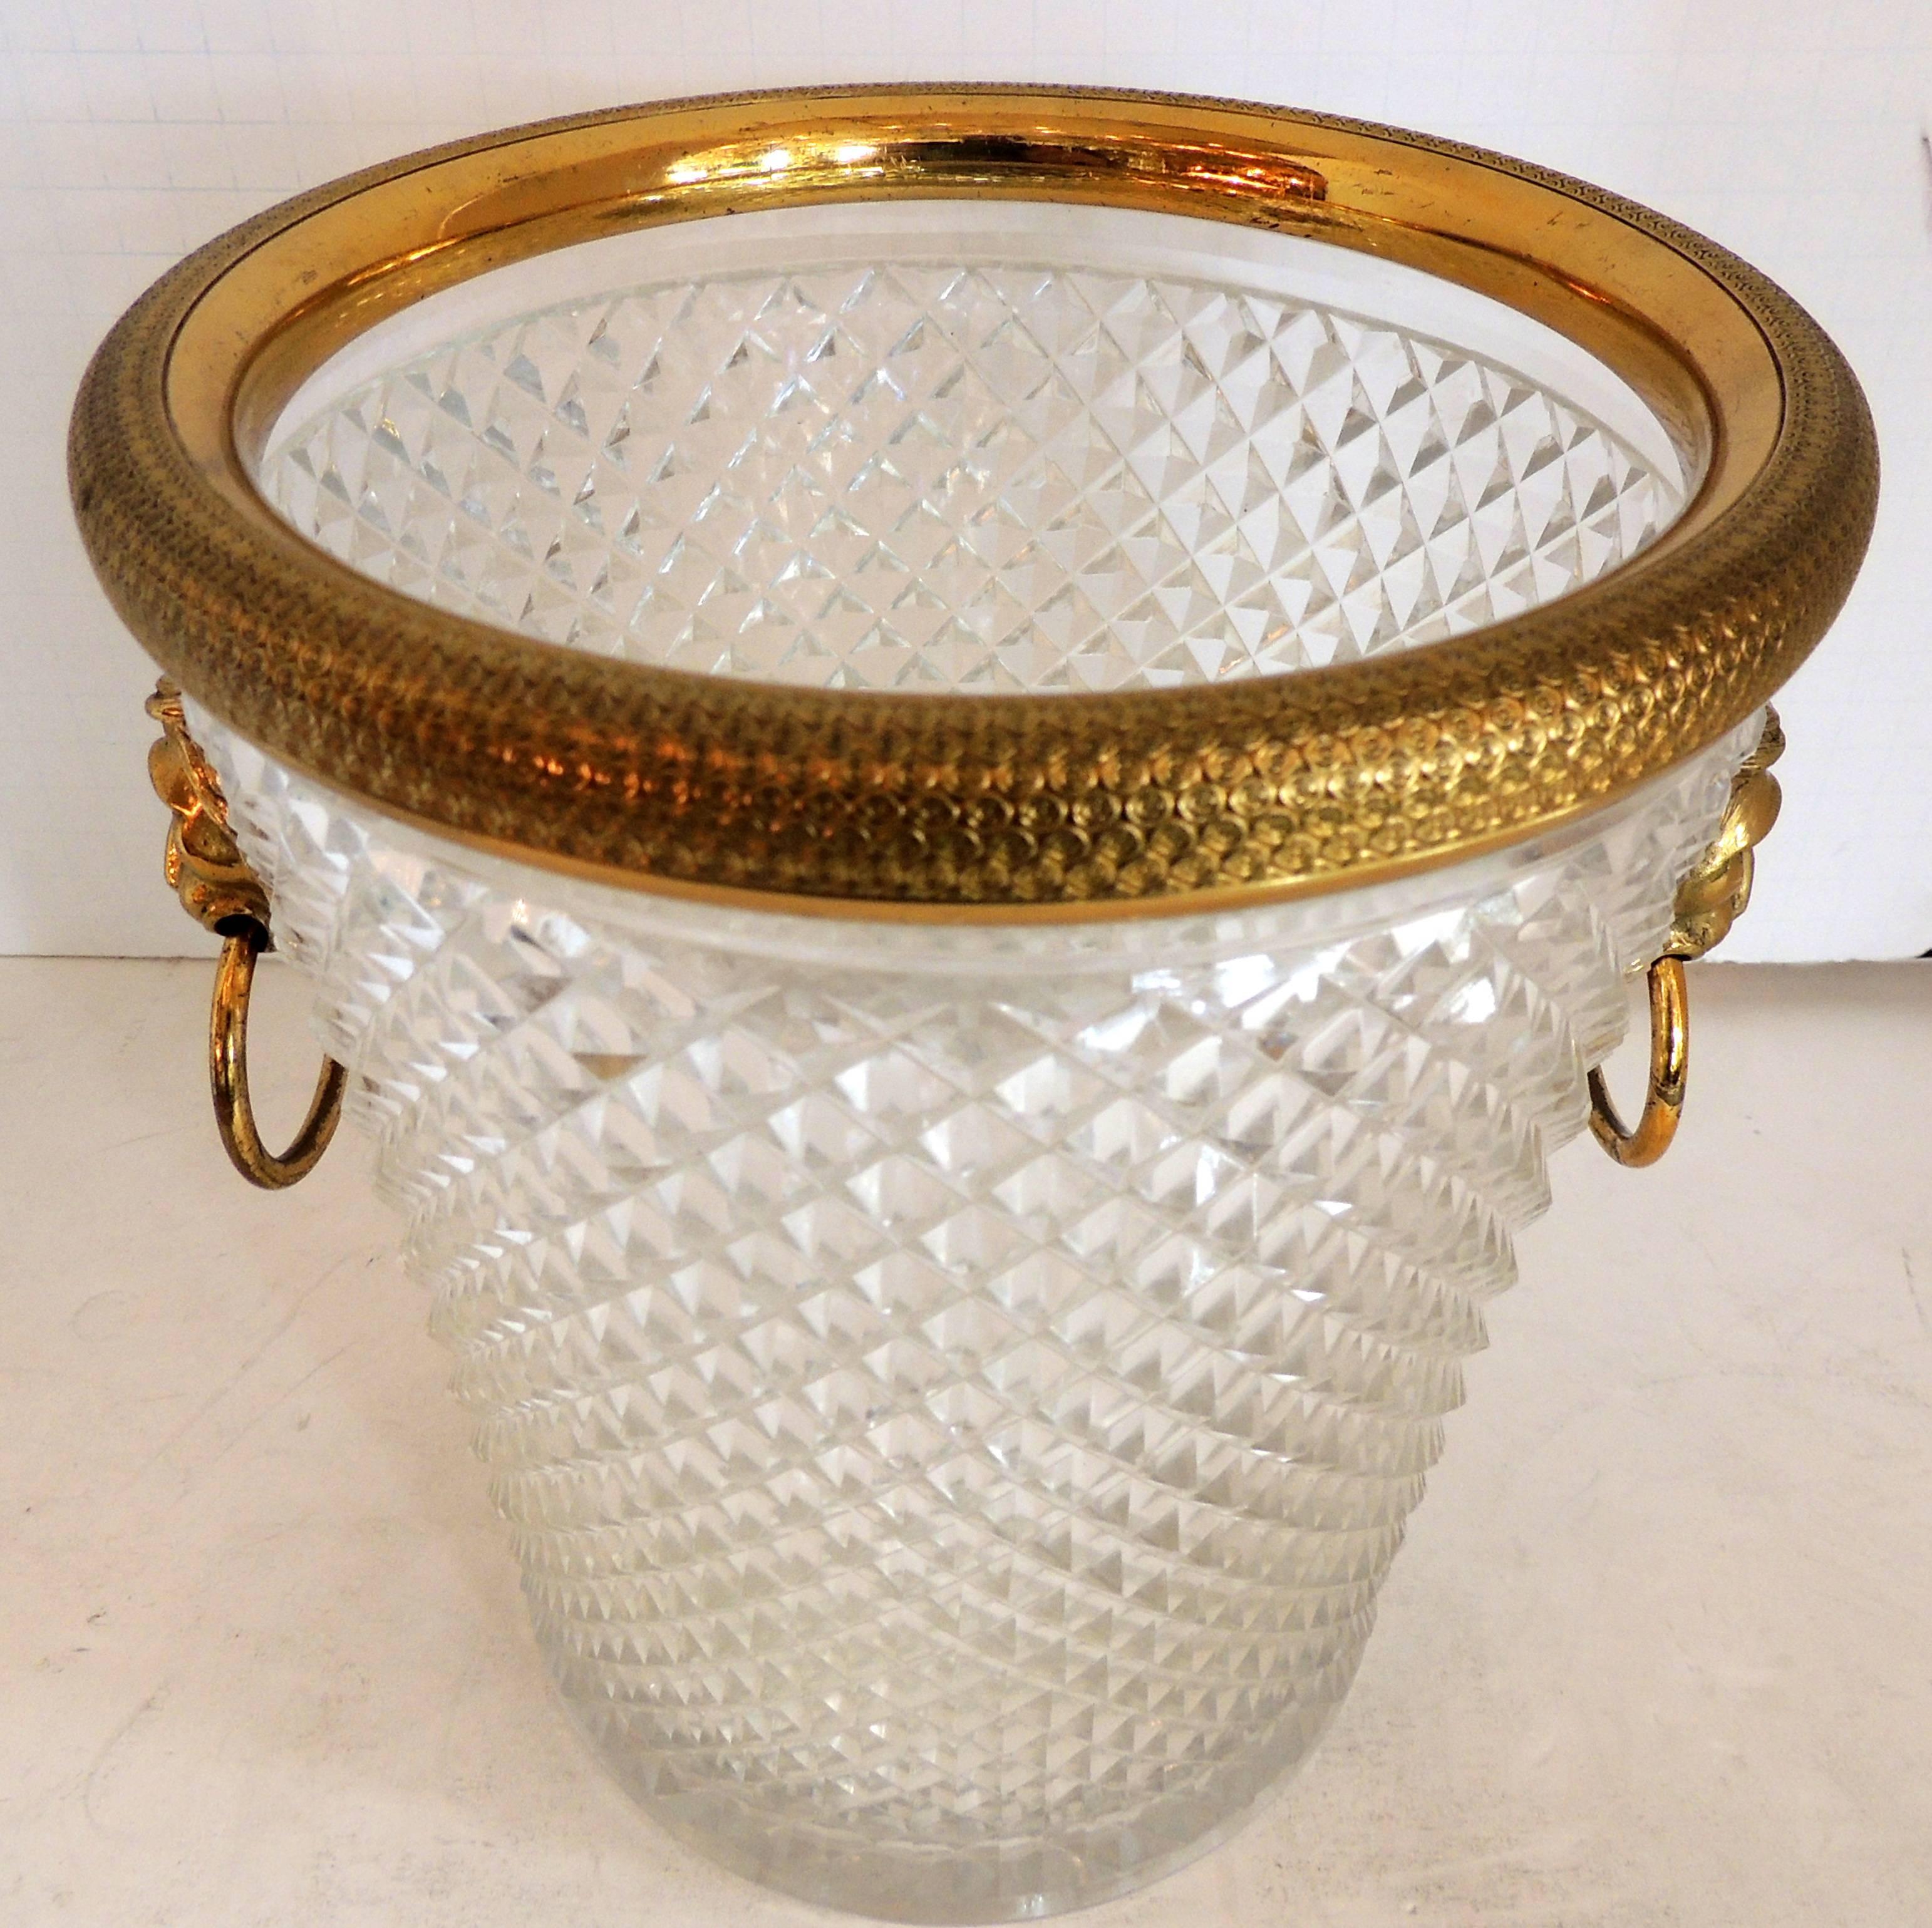 Elegant and very fine French neoclassical baccarat style lion handle doré bronze ormolu mounted and diamond cut crystal ice/champagne bucket.
Unsigned